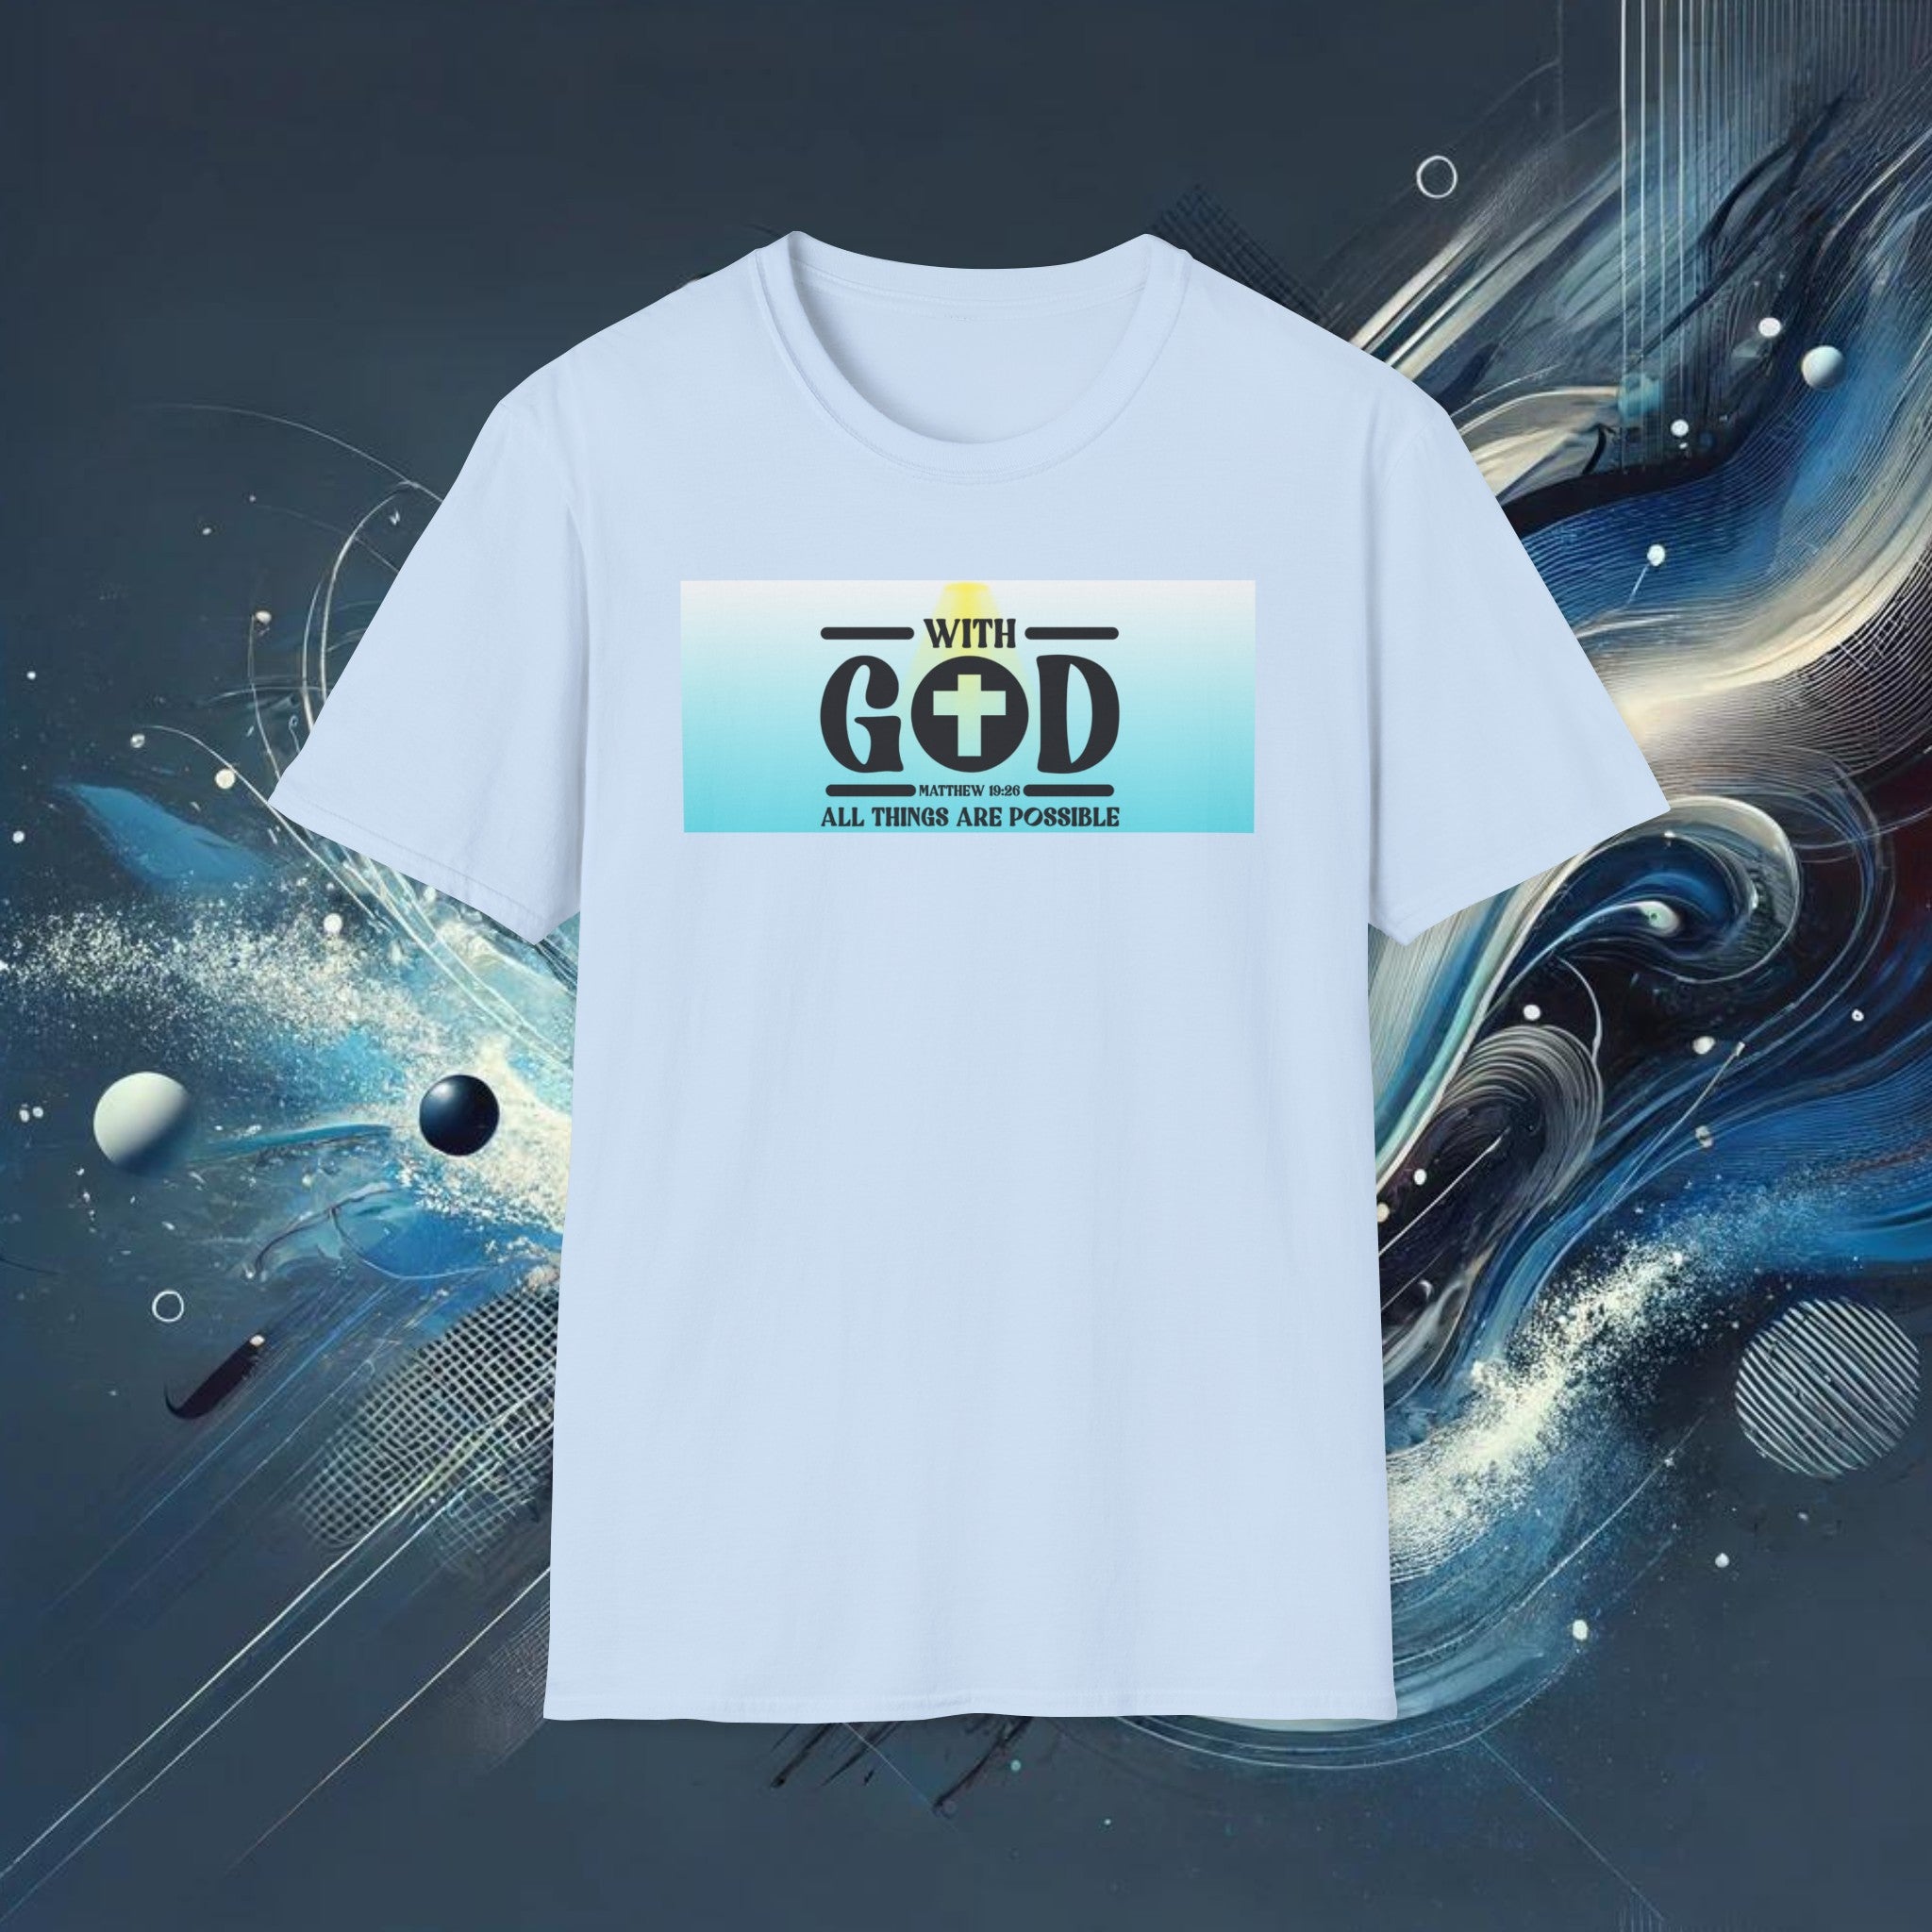 With God, All Things Are Possible T-Shirt